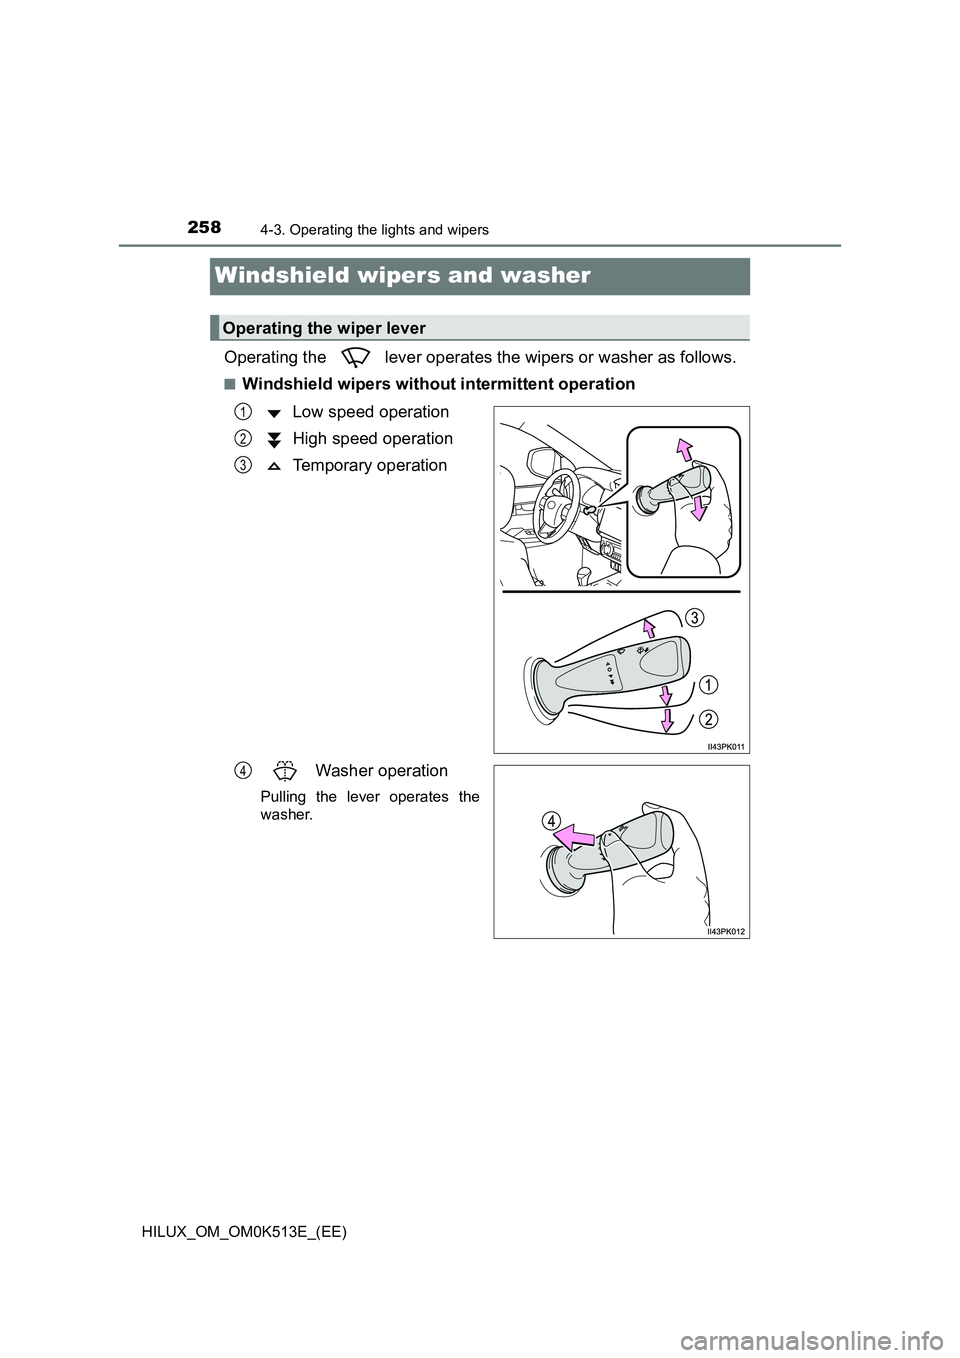 TOYOTA HILUX 2021  Owners Manual (in English) 2584-3. Operating the lights and wipers
HILUX_OM_OM0K513E_(EE)
Windshield wipers and washer
Operating the   lever operates the wipers or washer as follows.
�QWindshield wipers without intermittent ope